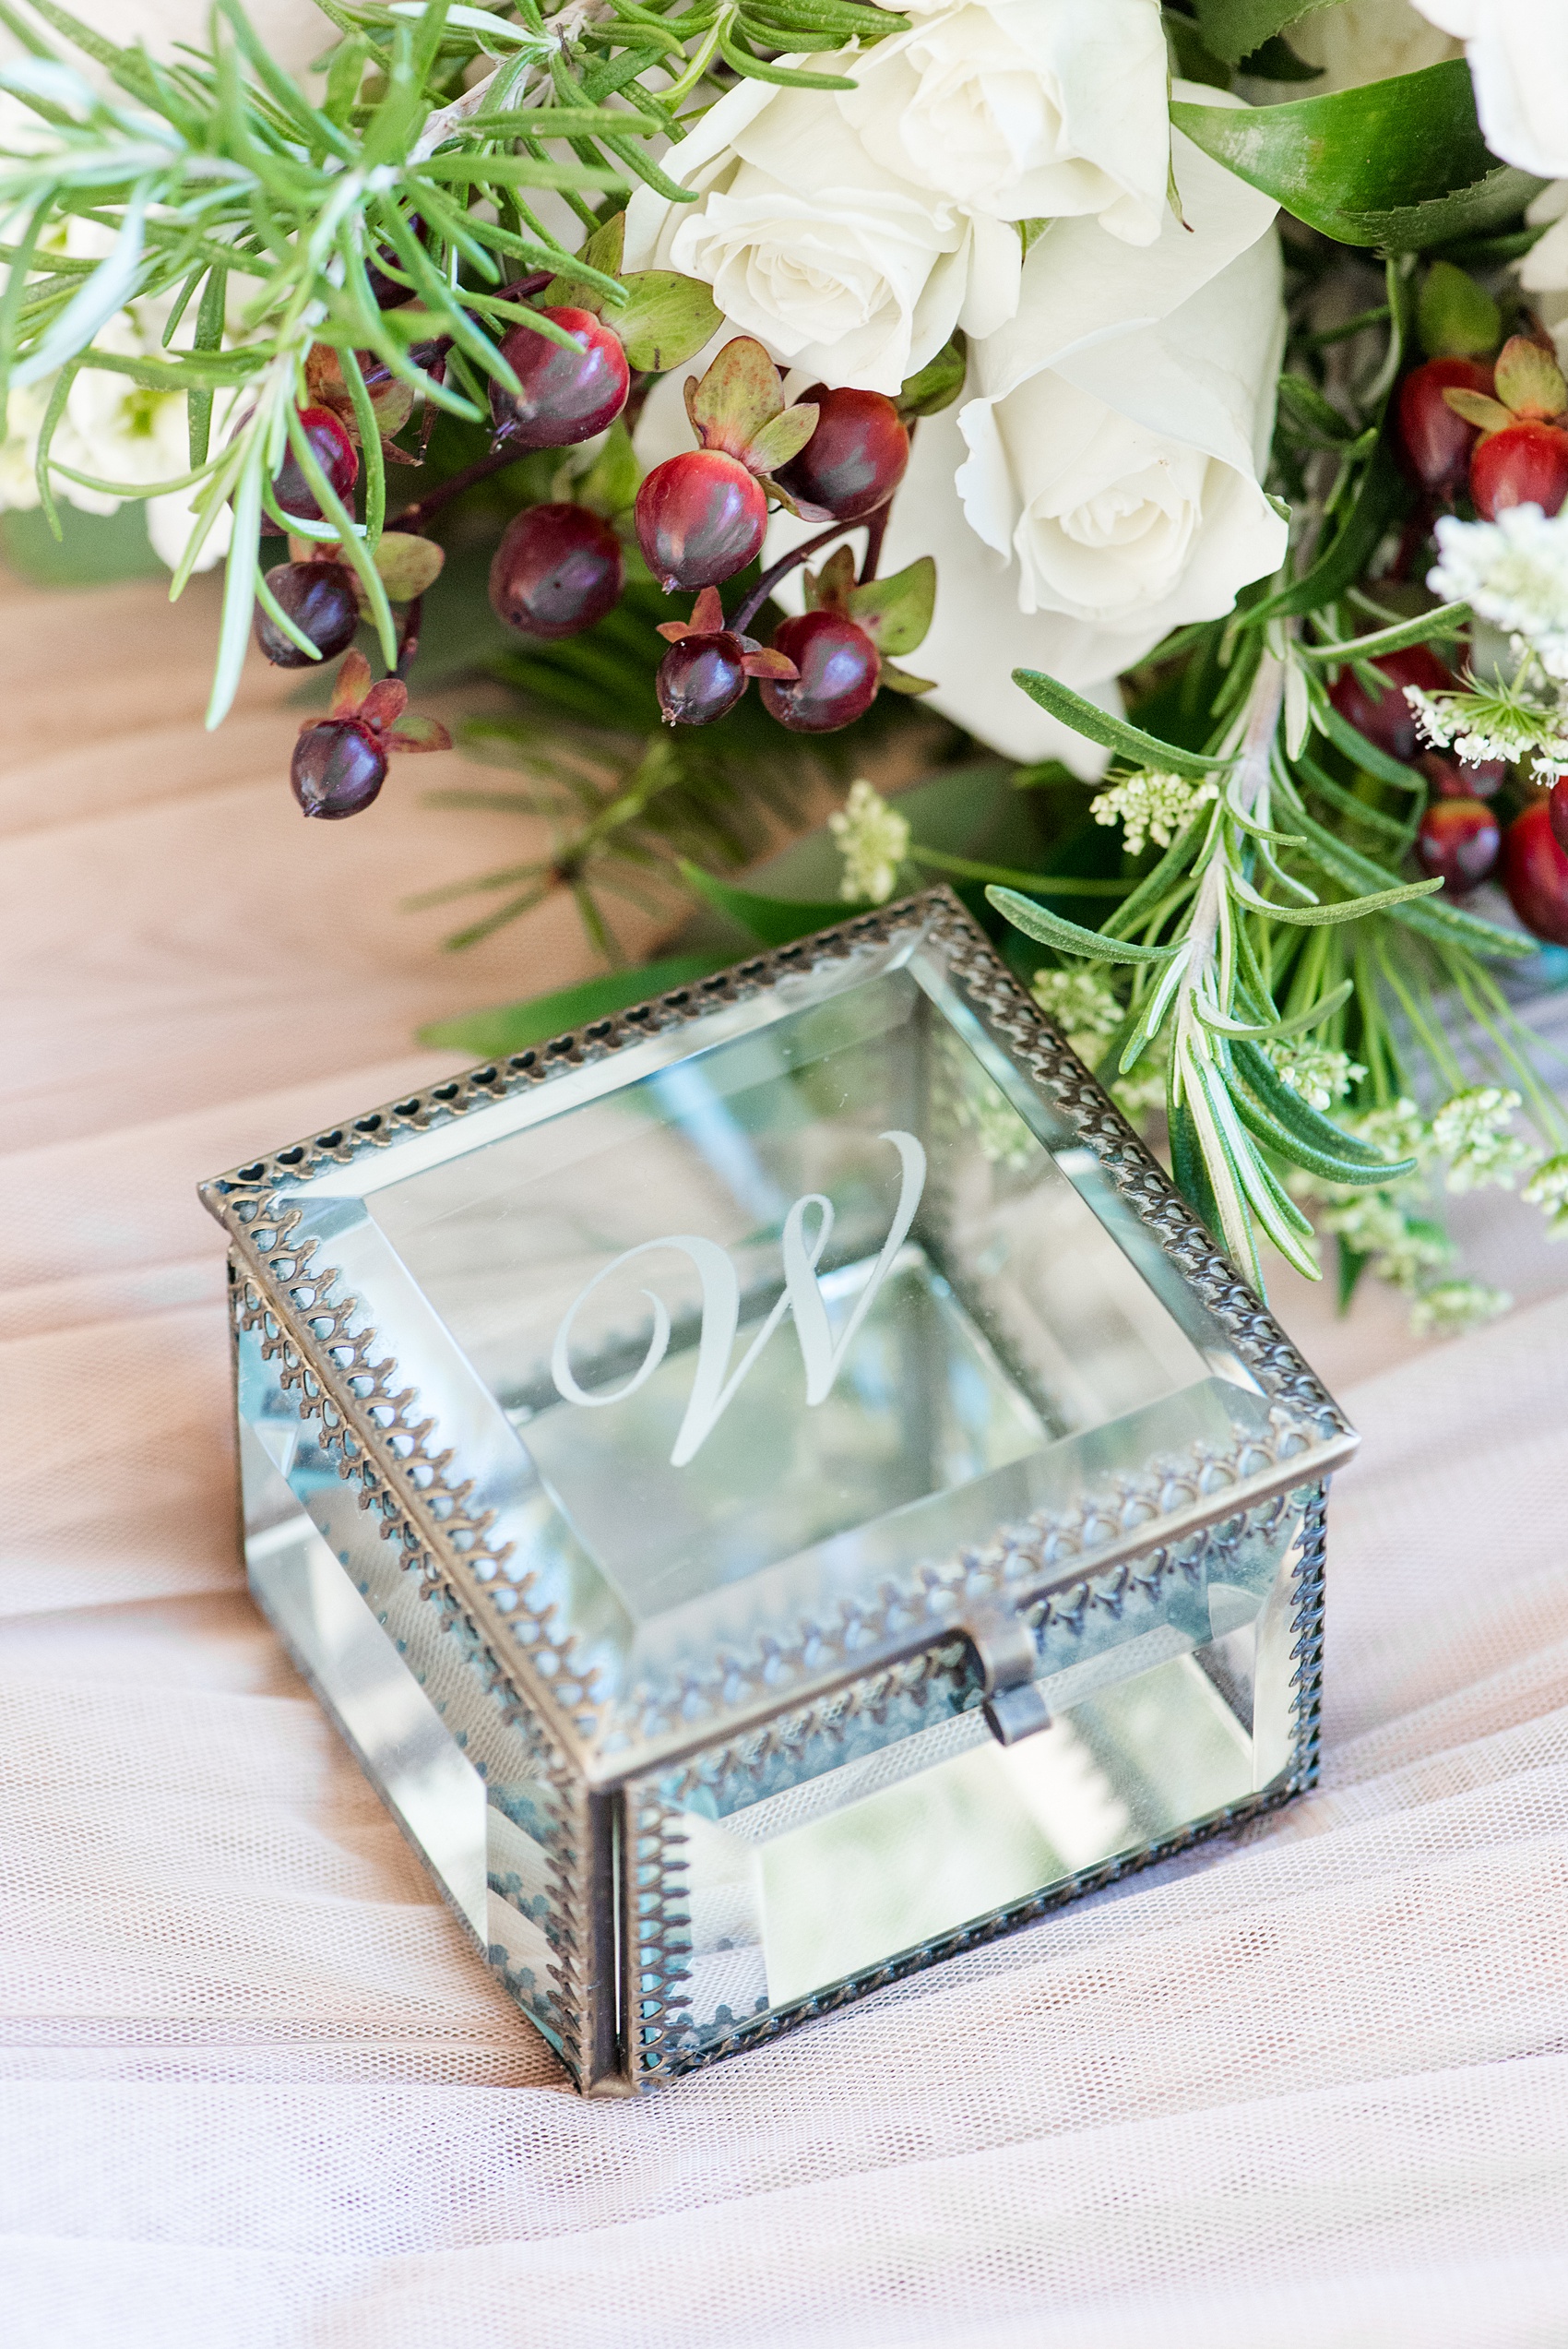 Pictures from a Christmas inspired wedding in downtown Raleigh, North Carolina by Mikkel Paige Photography. The bride got ready for their wedding at The Glass Box while their photographer captured their detail images like this monogrammed glass jewelry box. Click through for more ideas from their beautiful celebration, including decor photos in a green and gold decor palette for their reception. #mikkelpaige #raleighweddingphotographer #downtownRaleigh #greenandgoldwedding #detailphotos